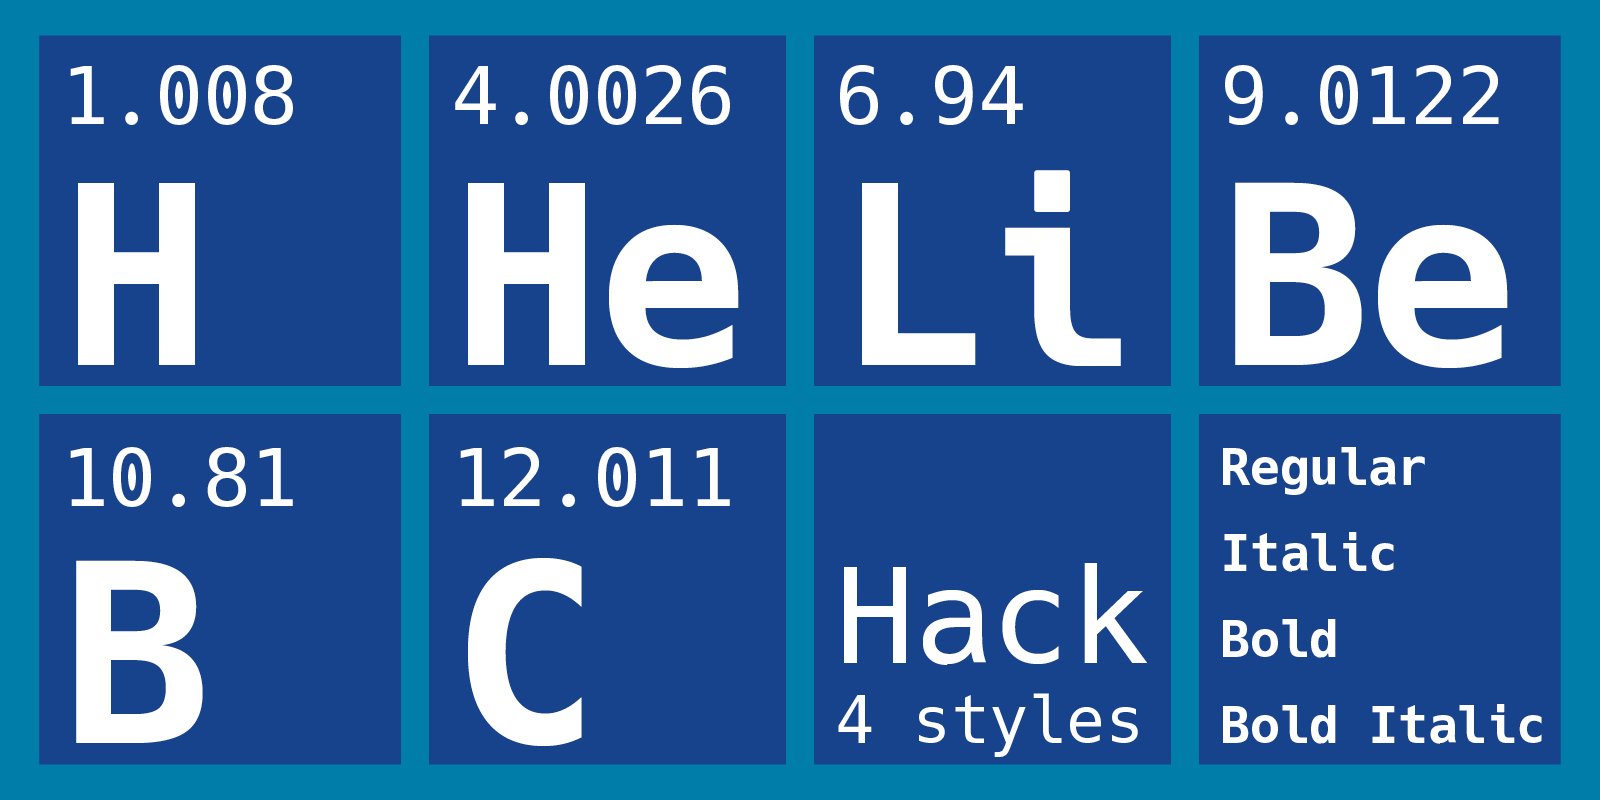 Card displaying Hack typeface in various styles